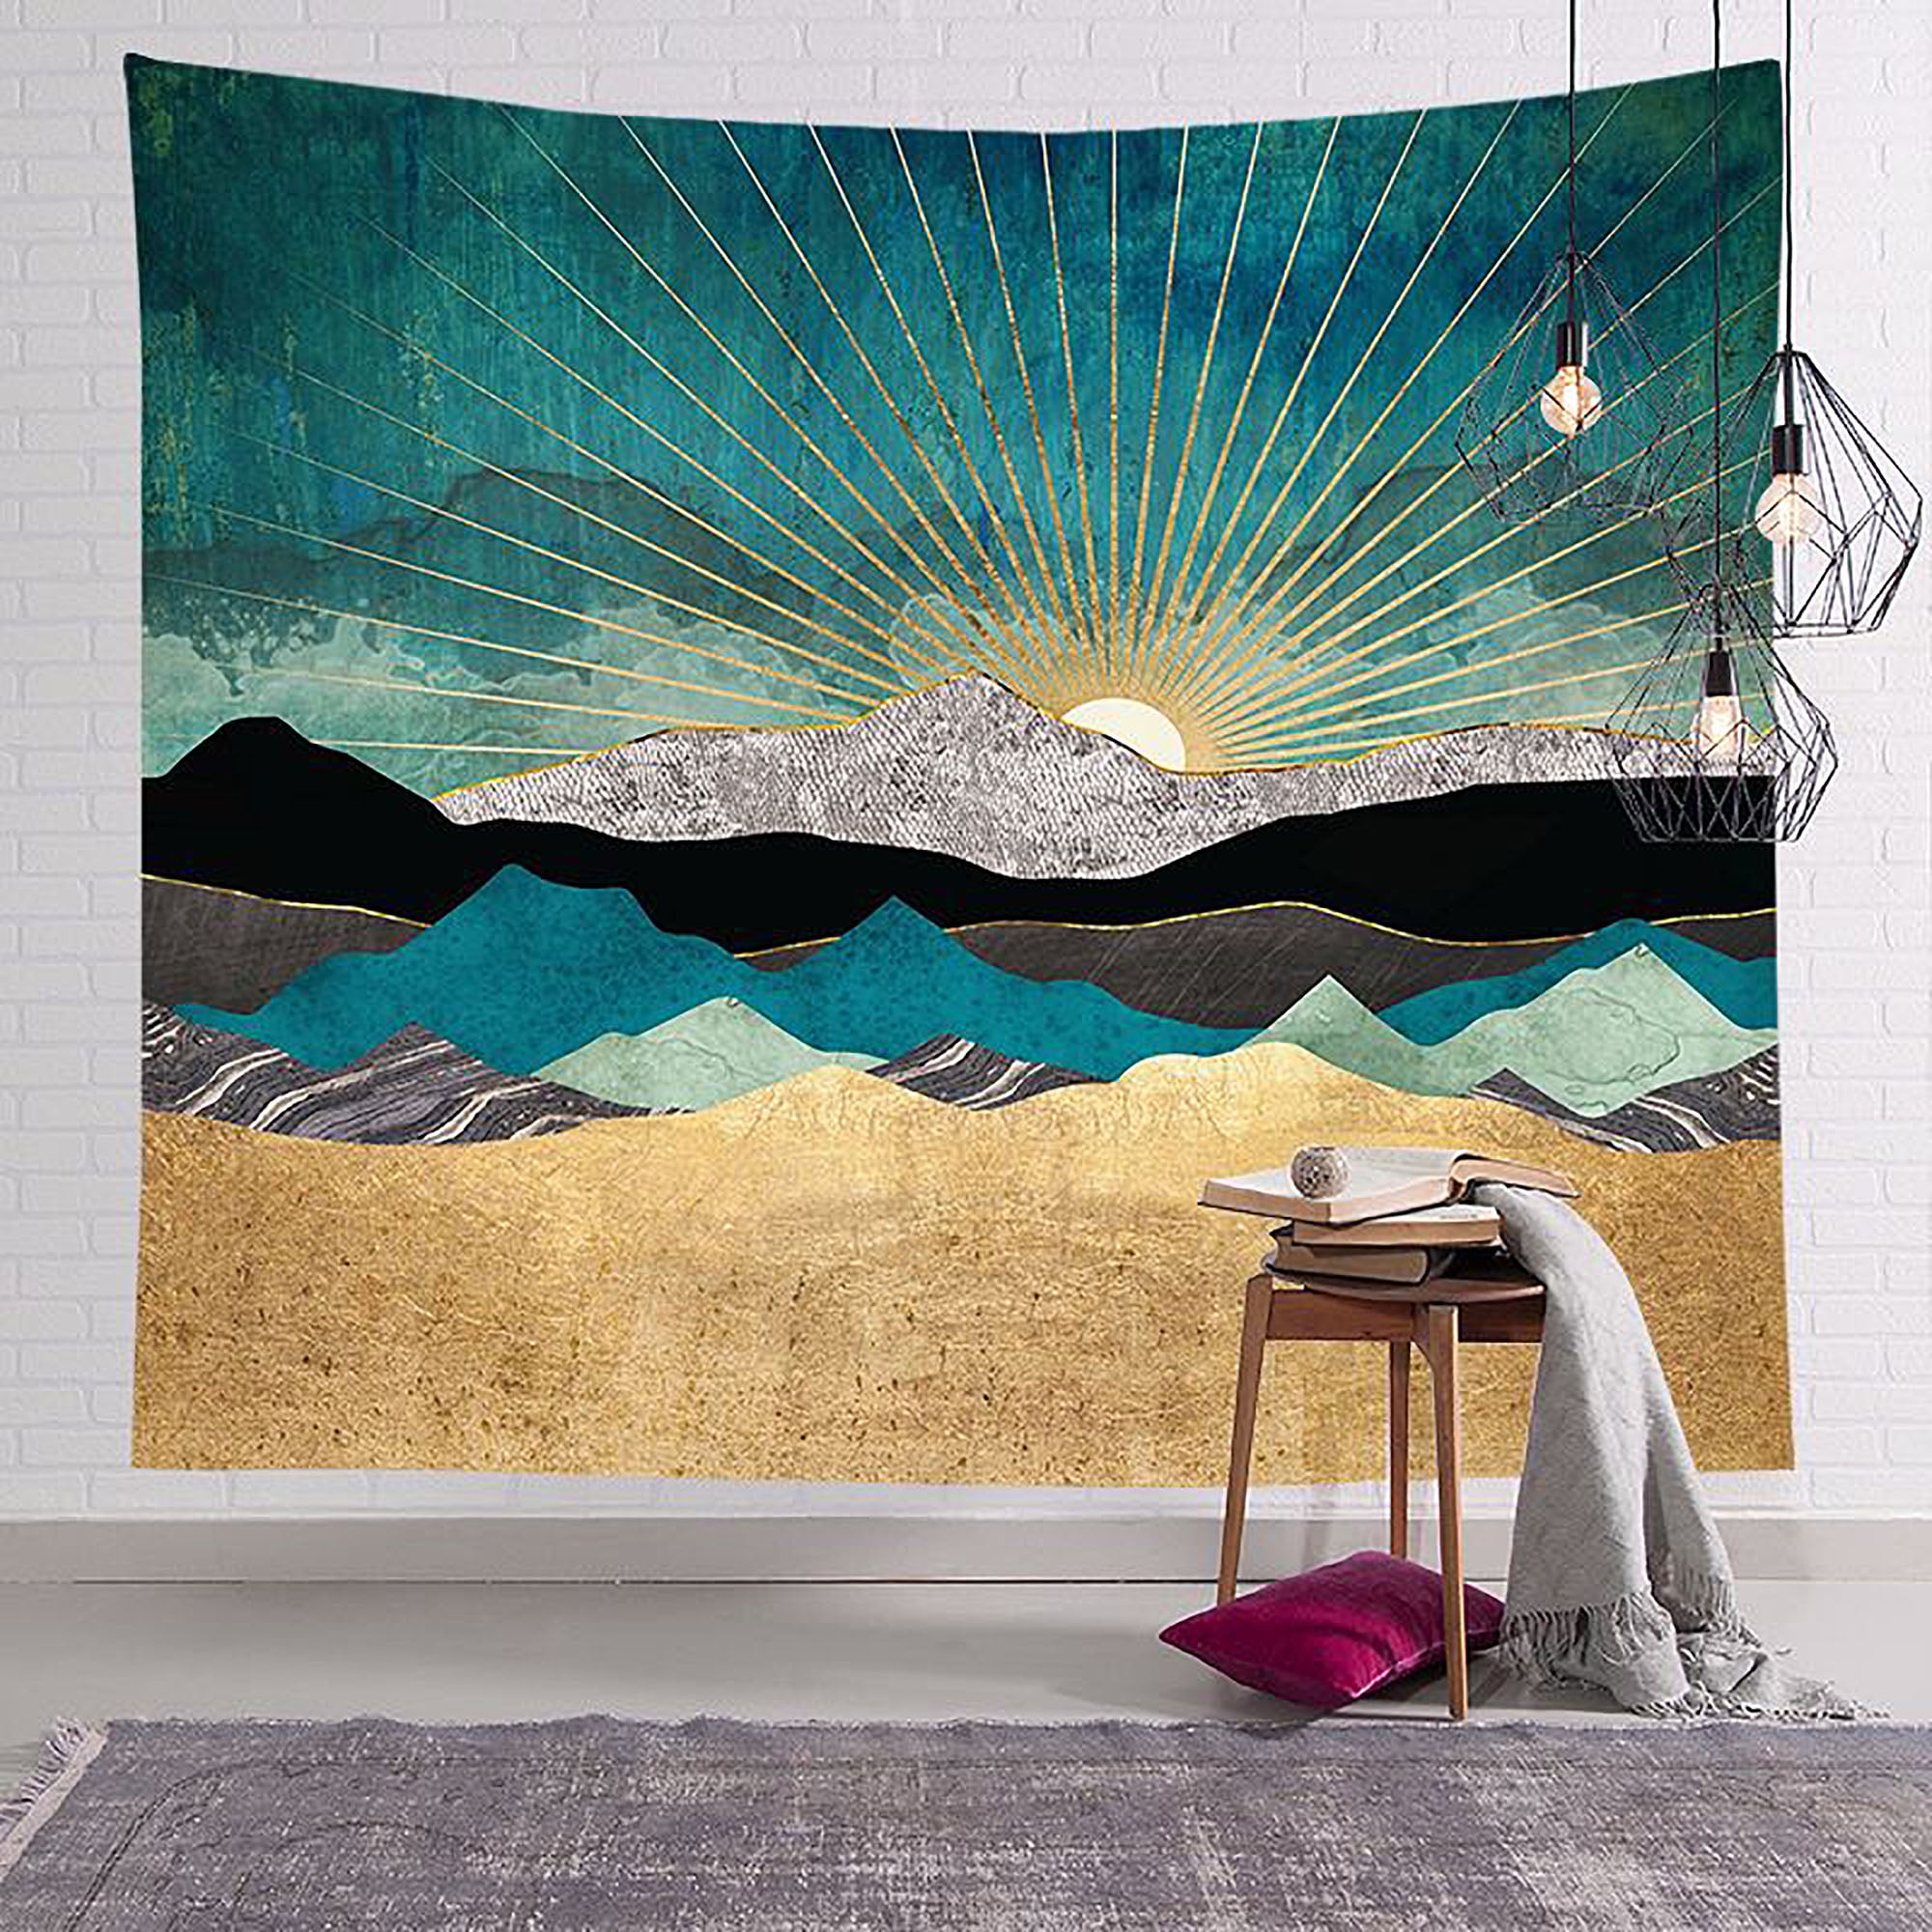 Nature Landscape Forest Tapestries Wall Hanging Hippie Tapestry Background Decor